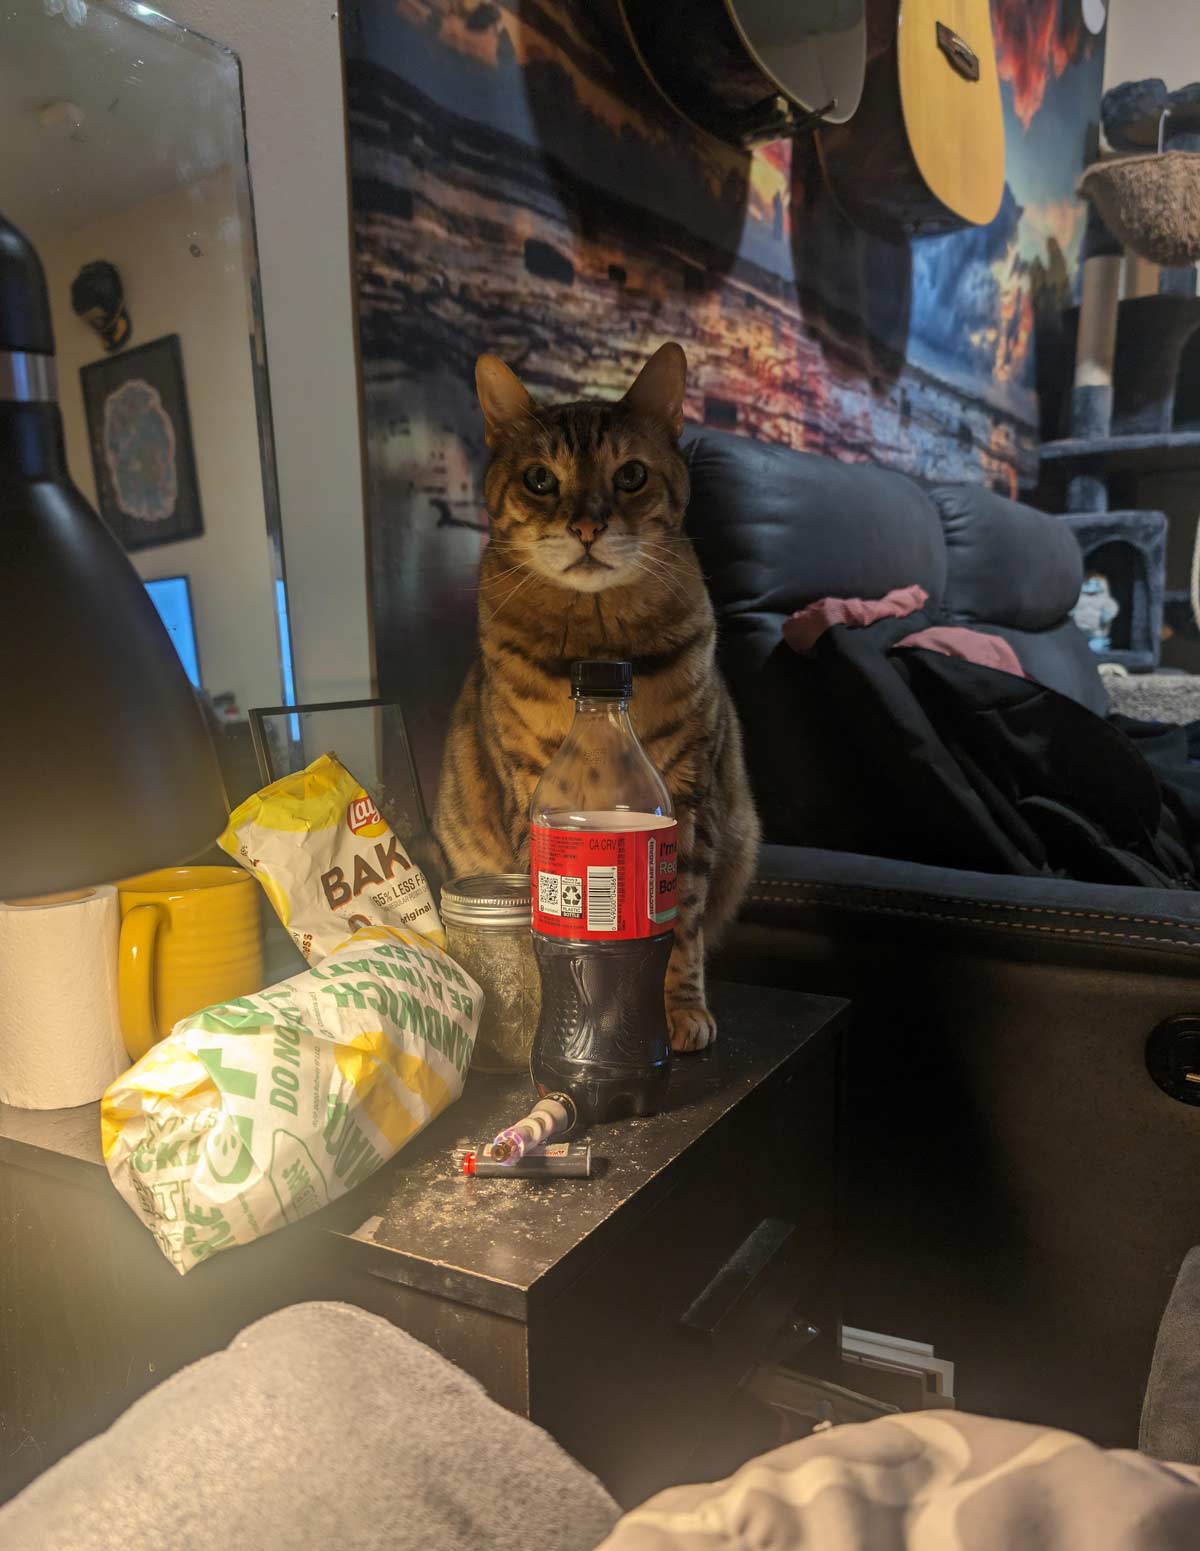 Got a tuna sandwich, and my cat's been staring at me like this ever since